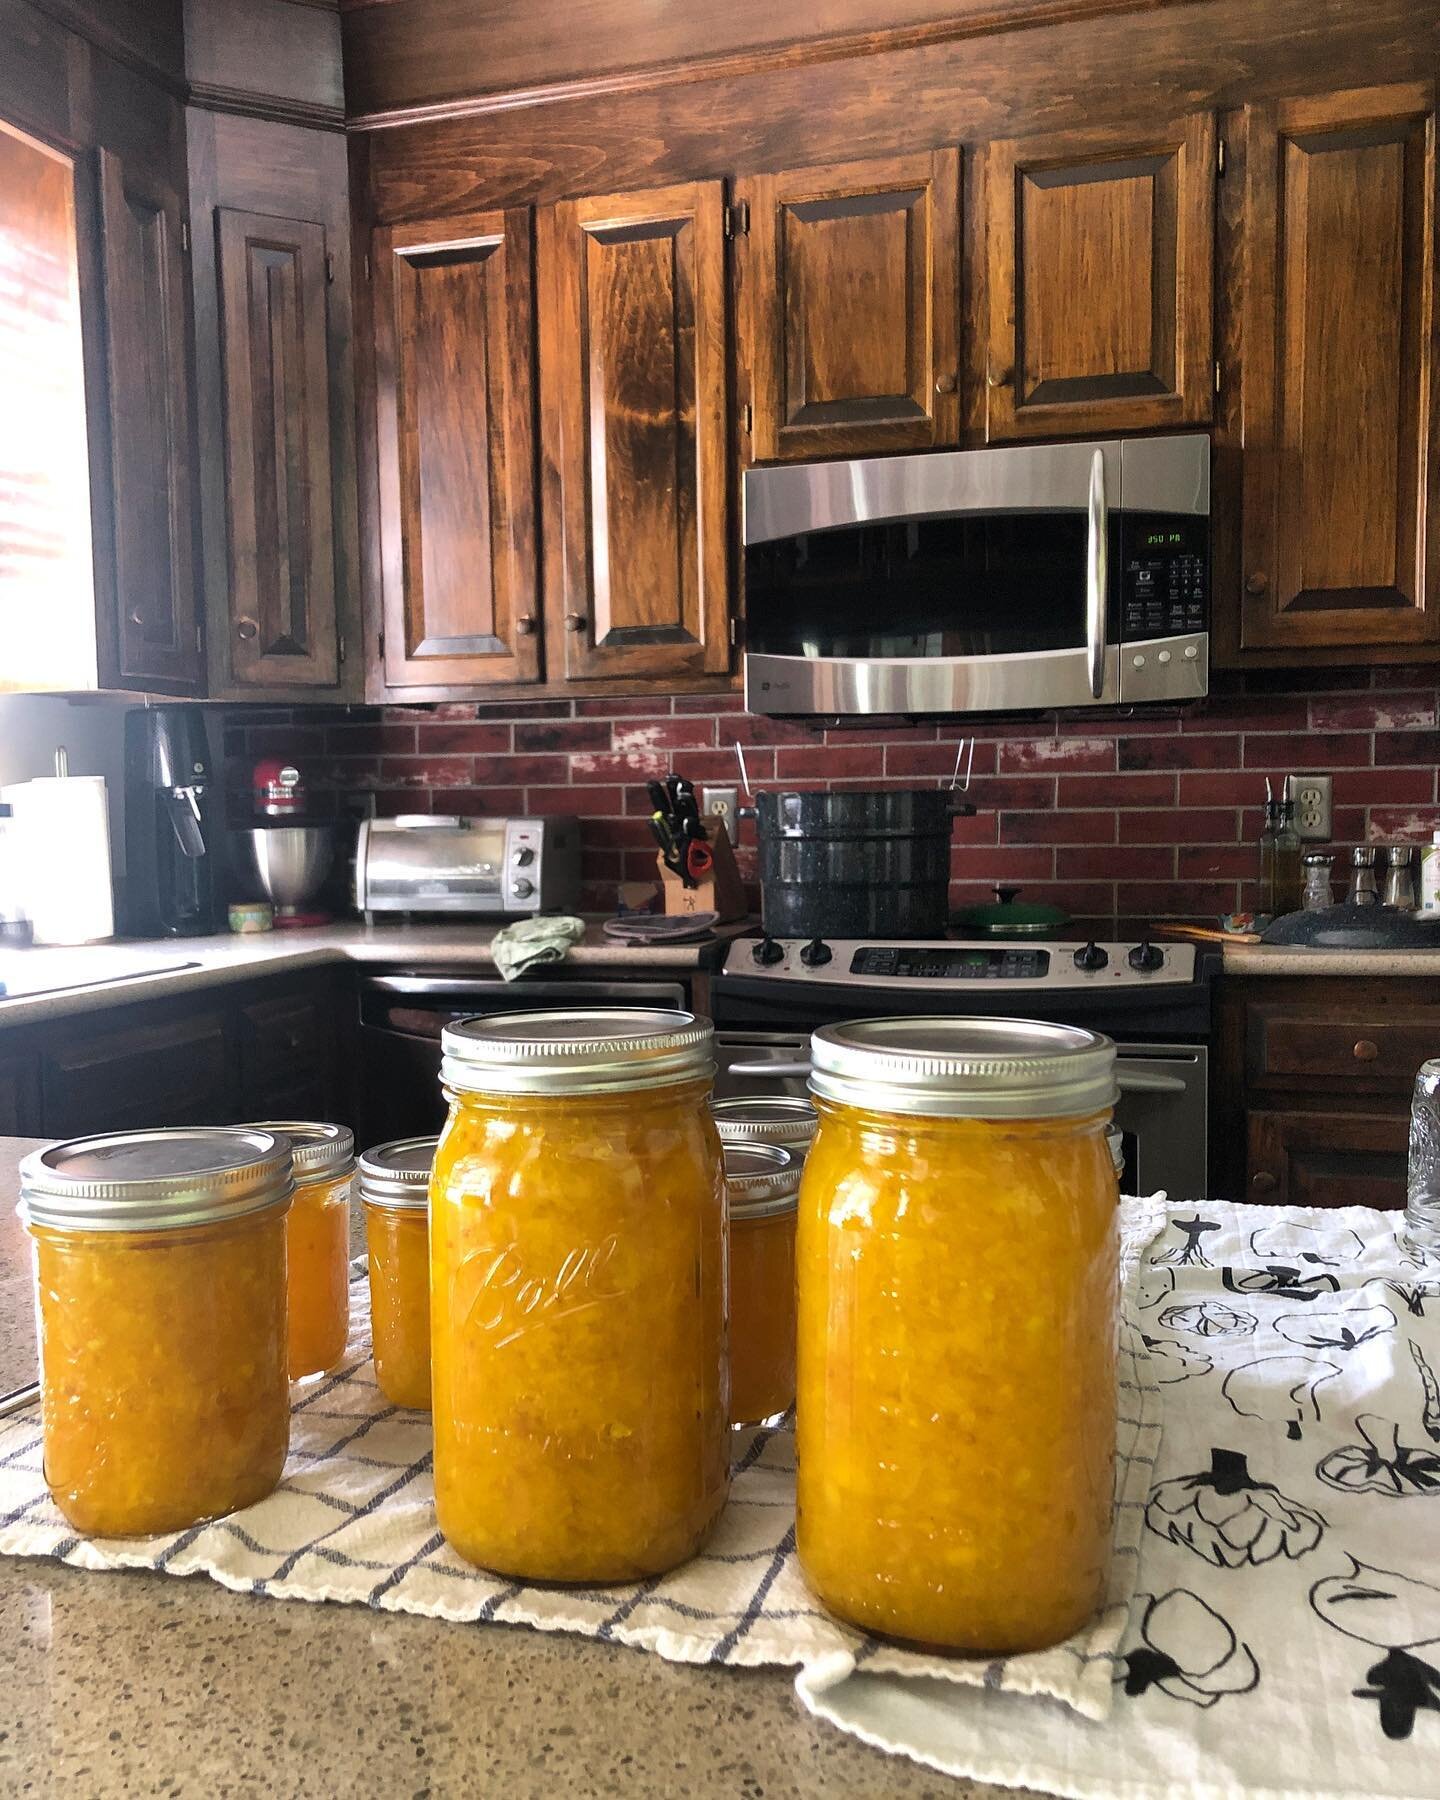 Made our first batch of relish (which turned out golden) with cucumbers from our garden. Now it&rsquo;s fig season and I&rsquo;m making jam + preserves. Canning foods to enjoy ourselves and share with others is something I am becoming very passionate